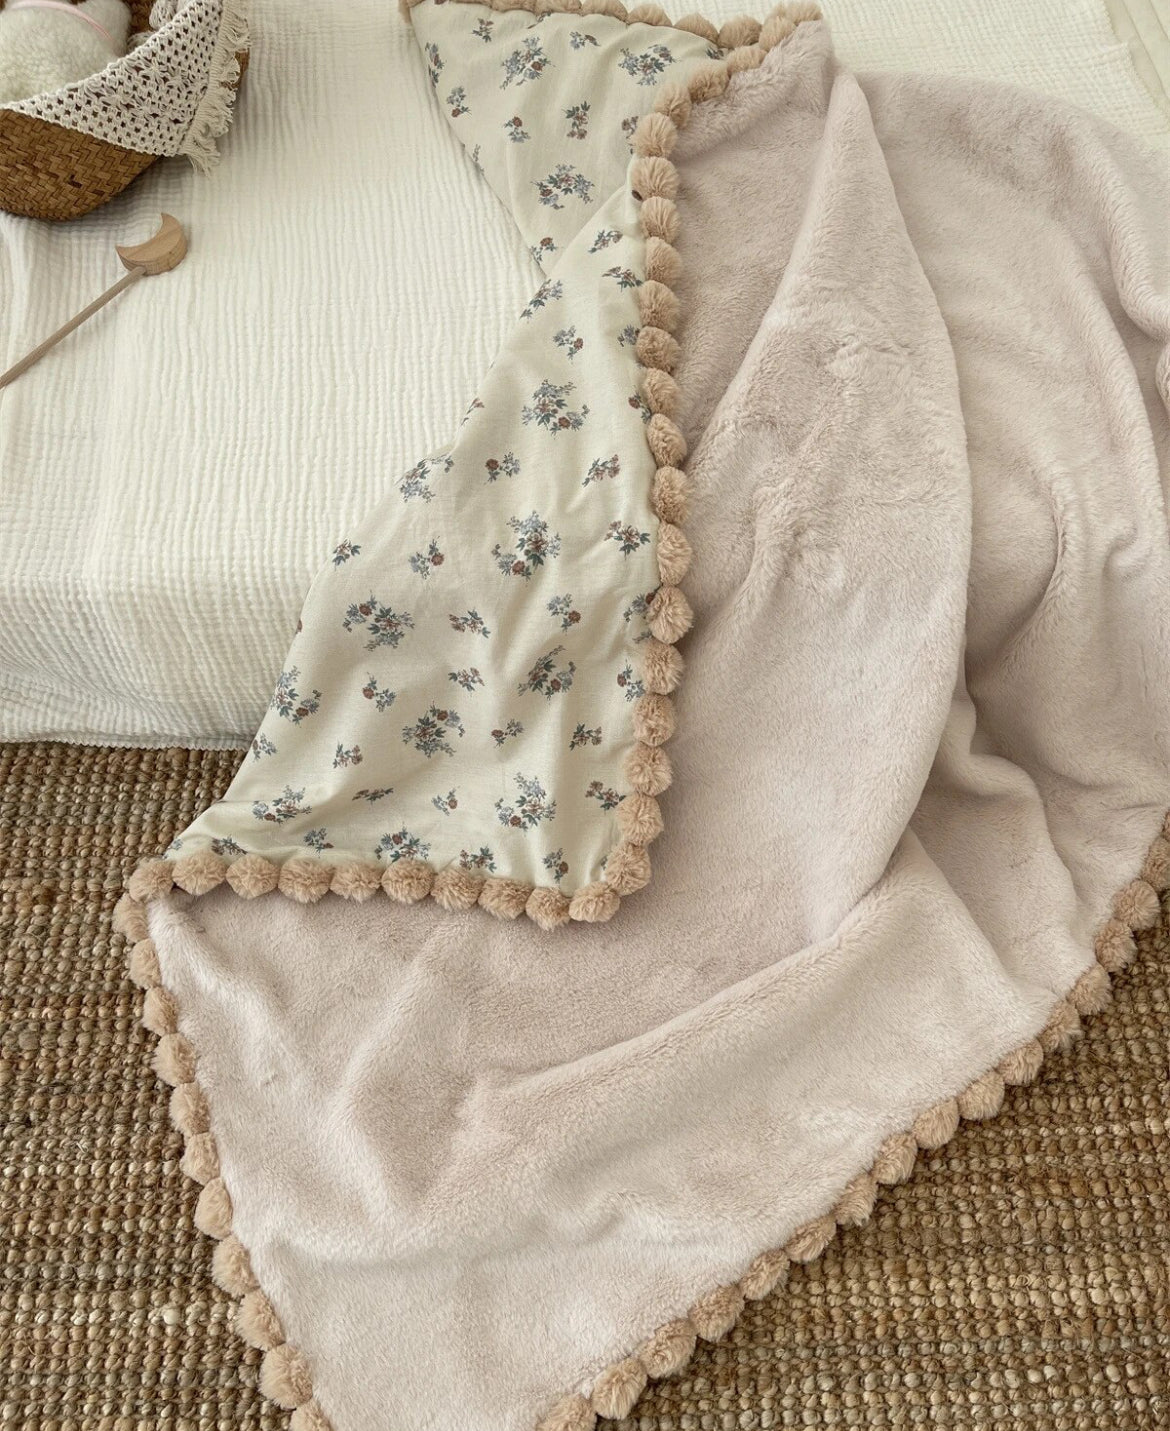 Warm Winter Baby Blanket, Pompom Blush and Blooms, Minky Quilt Bedding, 35*51 inches